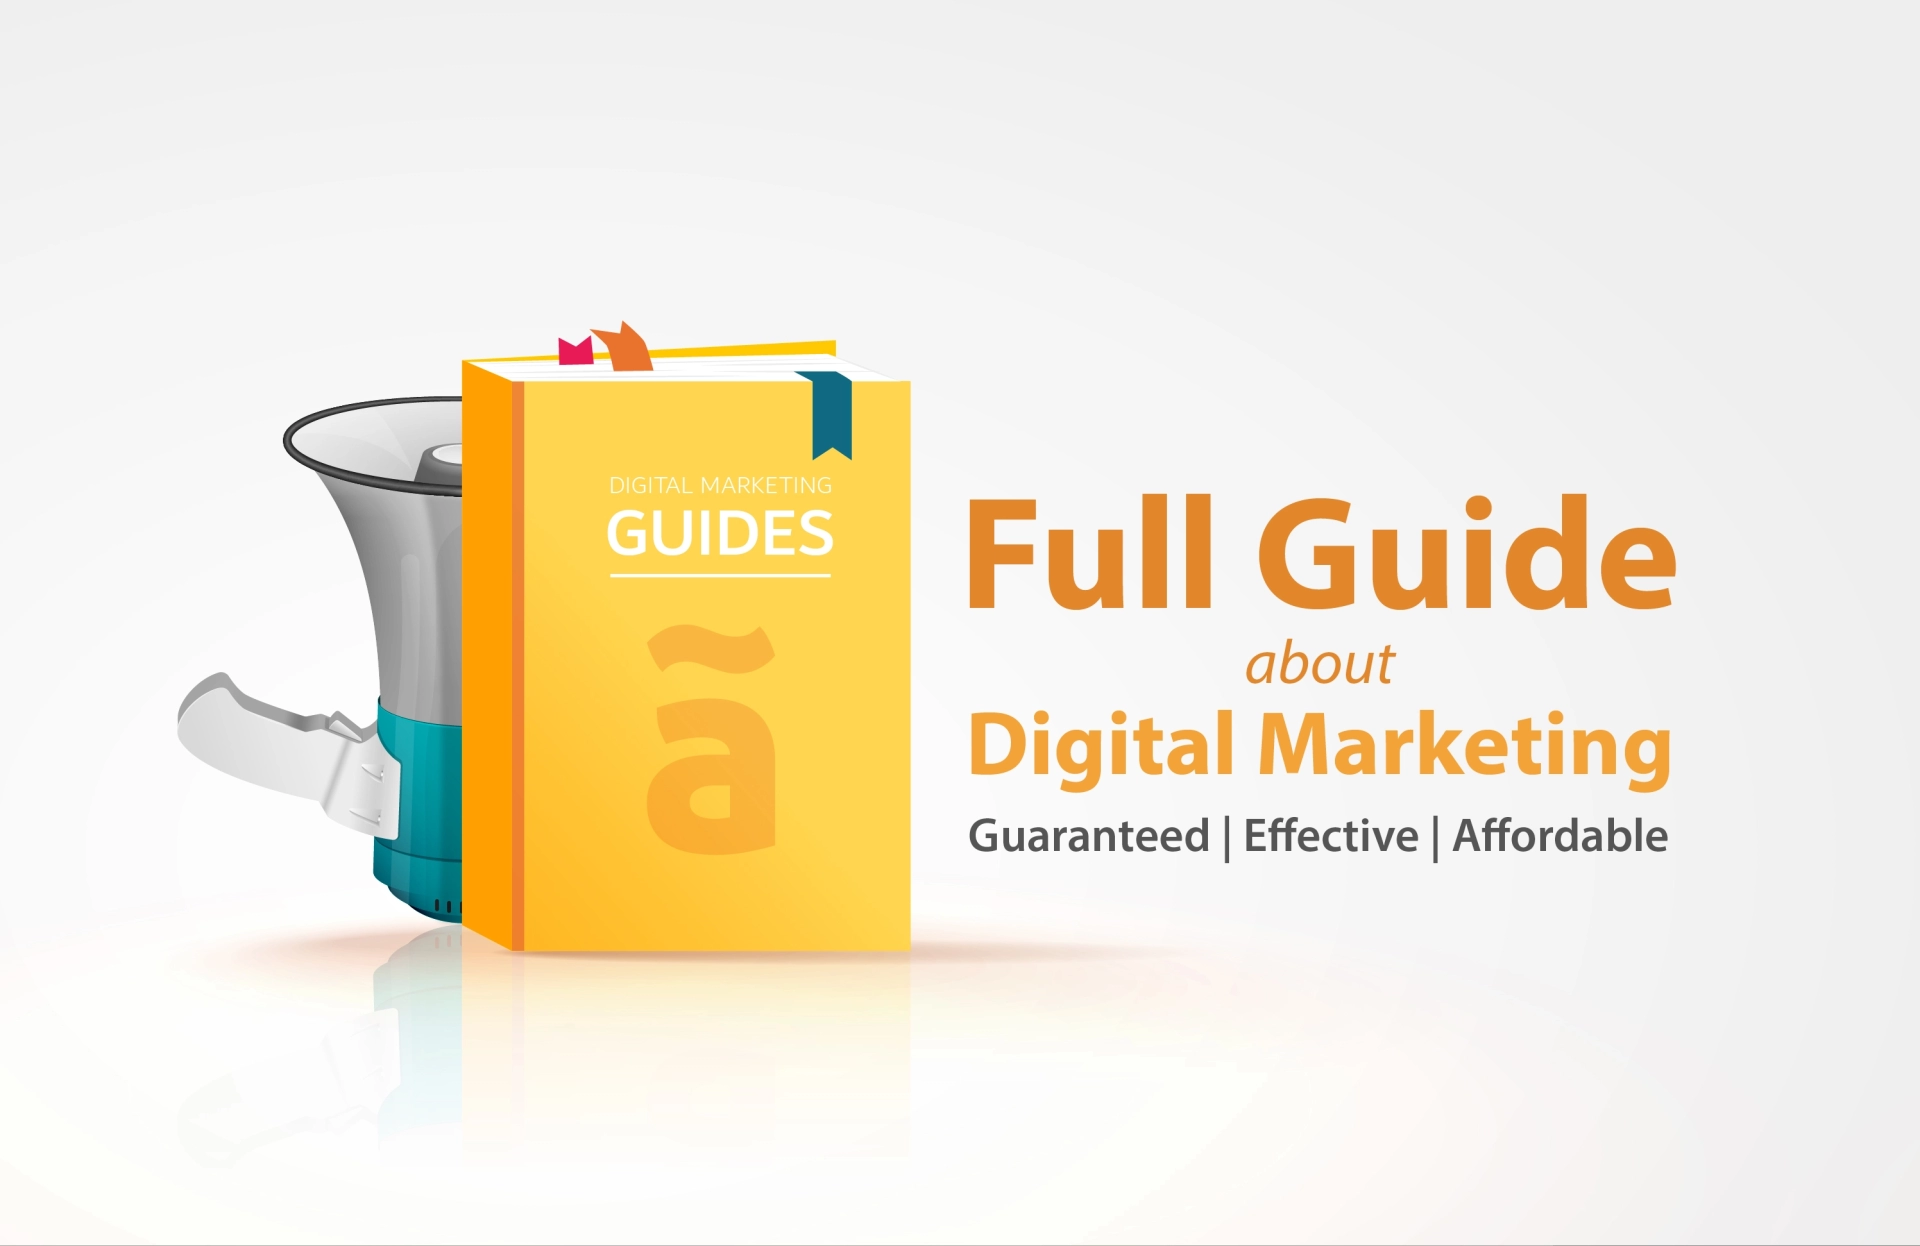 Full Guide about Digital Marketing, Guaranteed | Effective | Affordable | artiMedia Pro